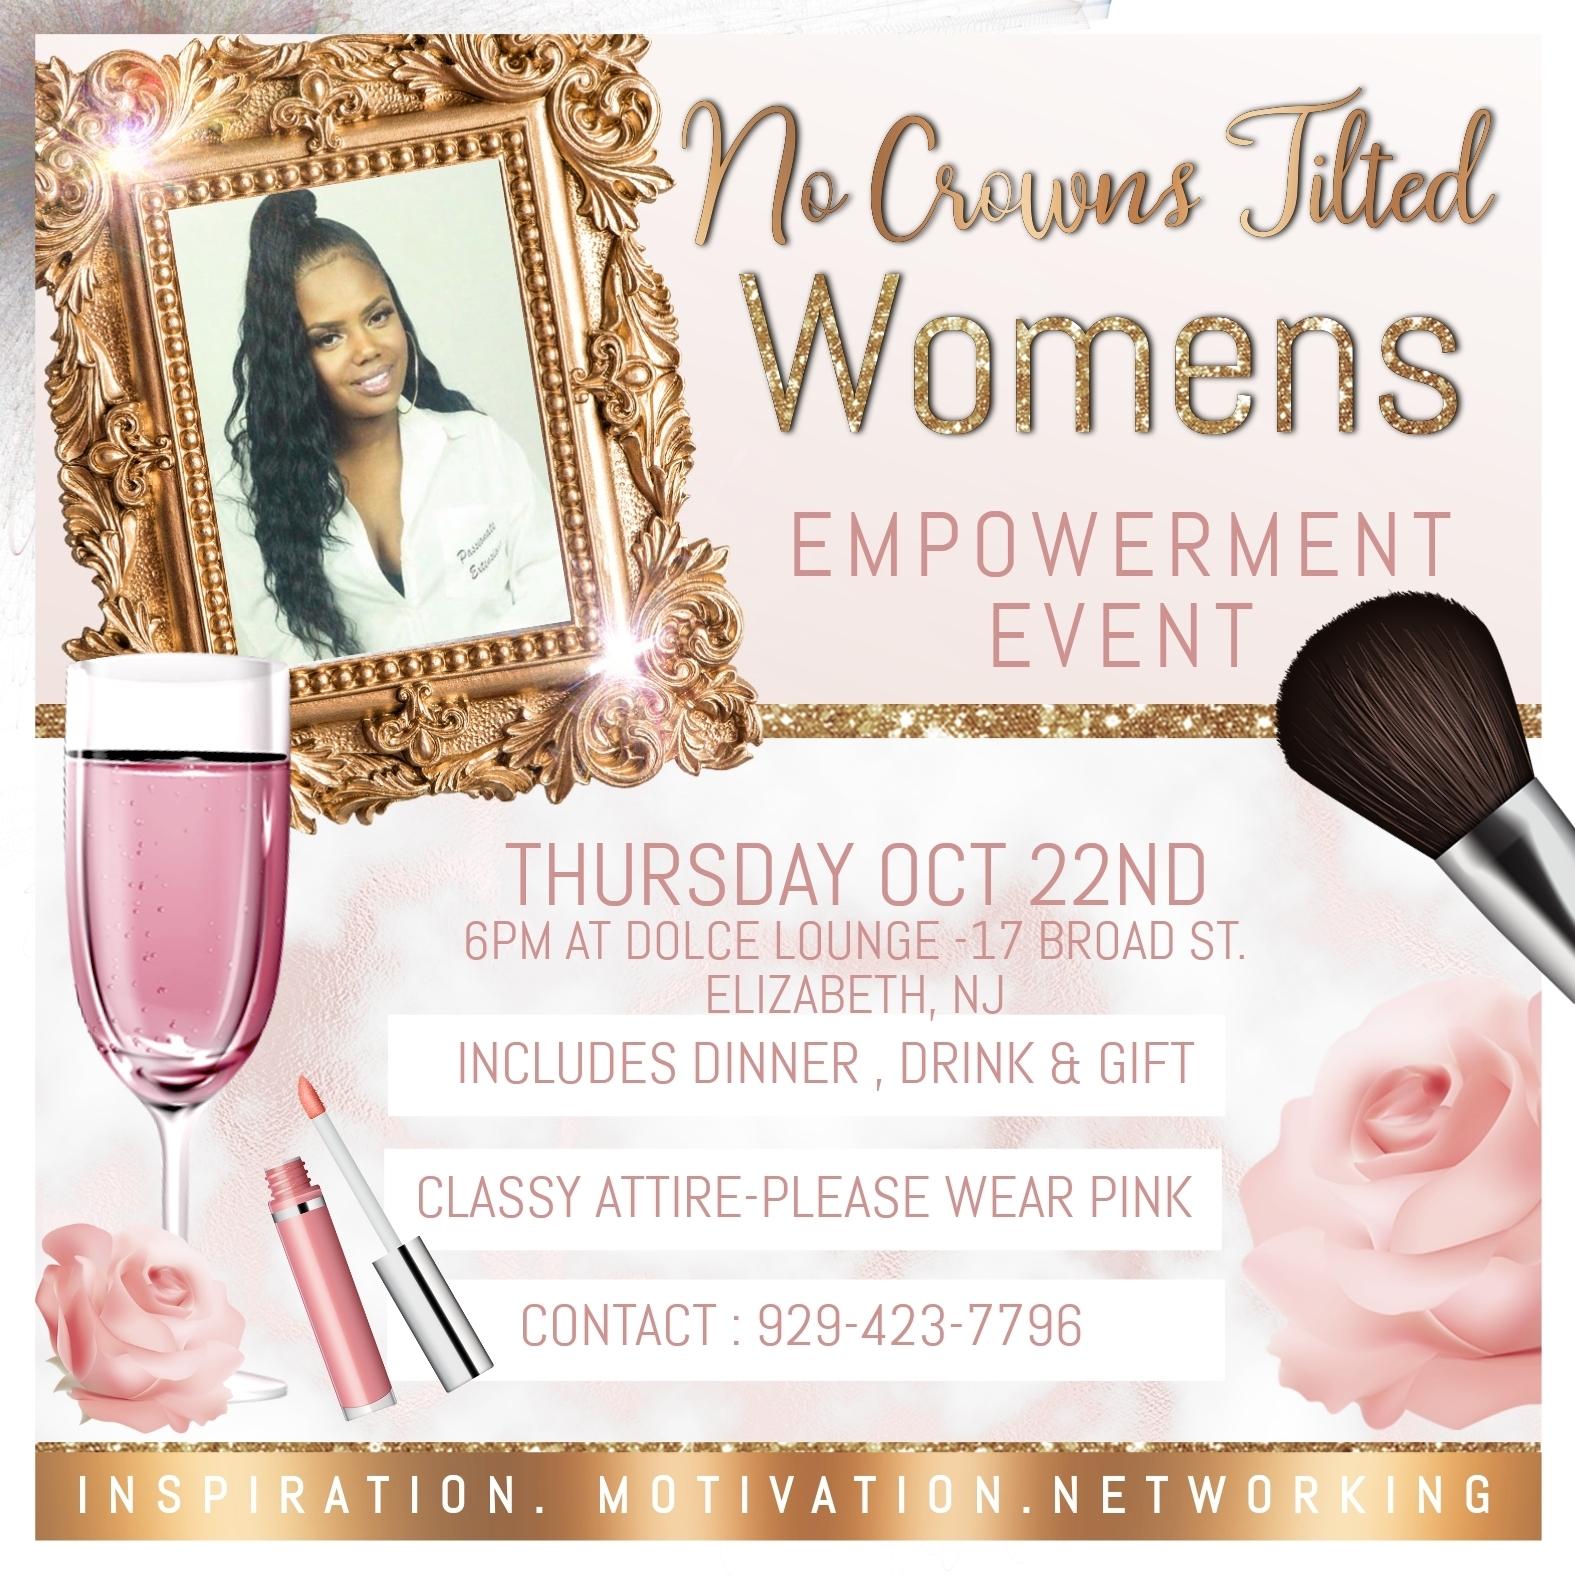 No Crowns Tilted-Womens Empowerment Event